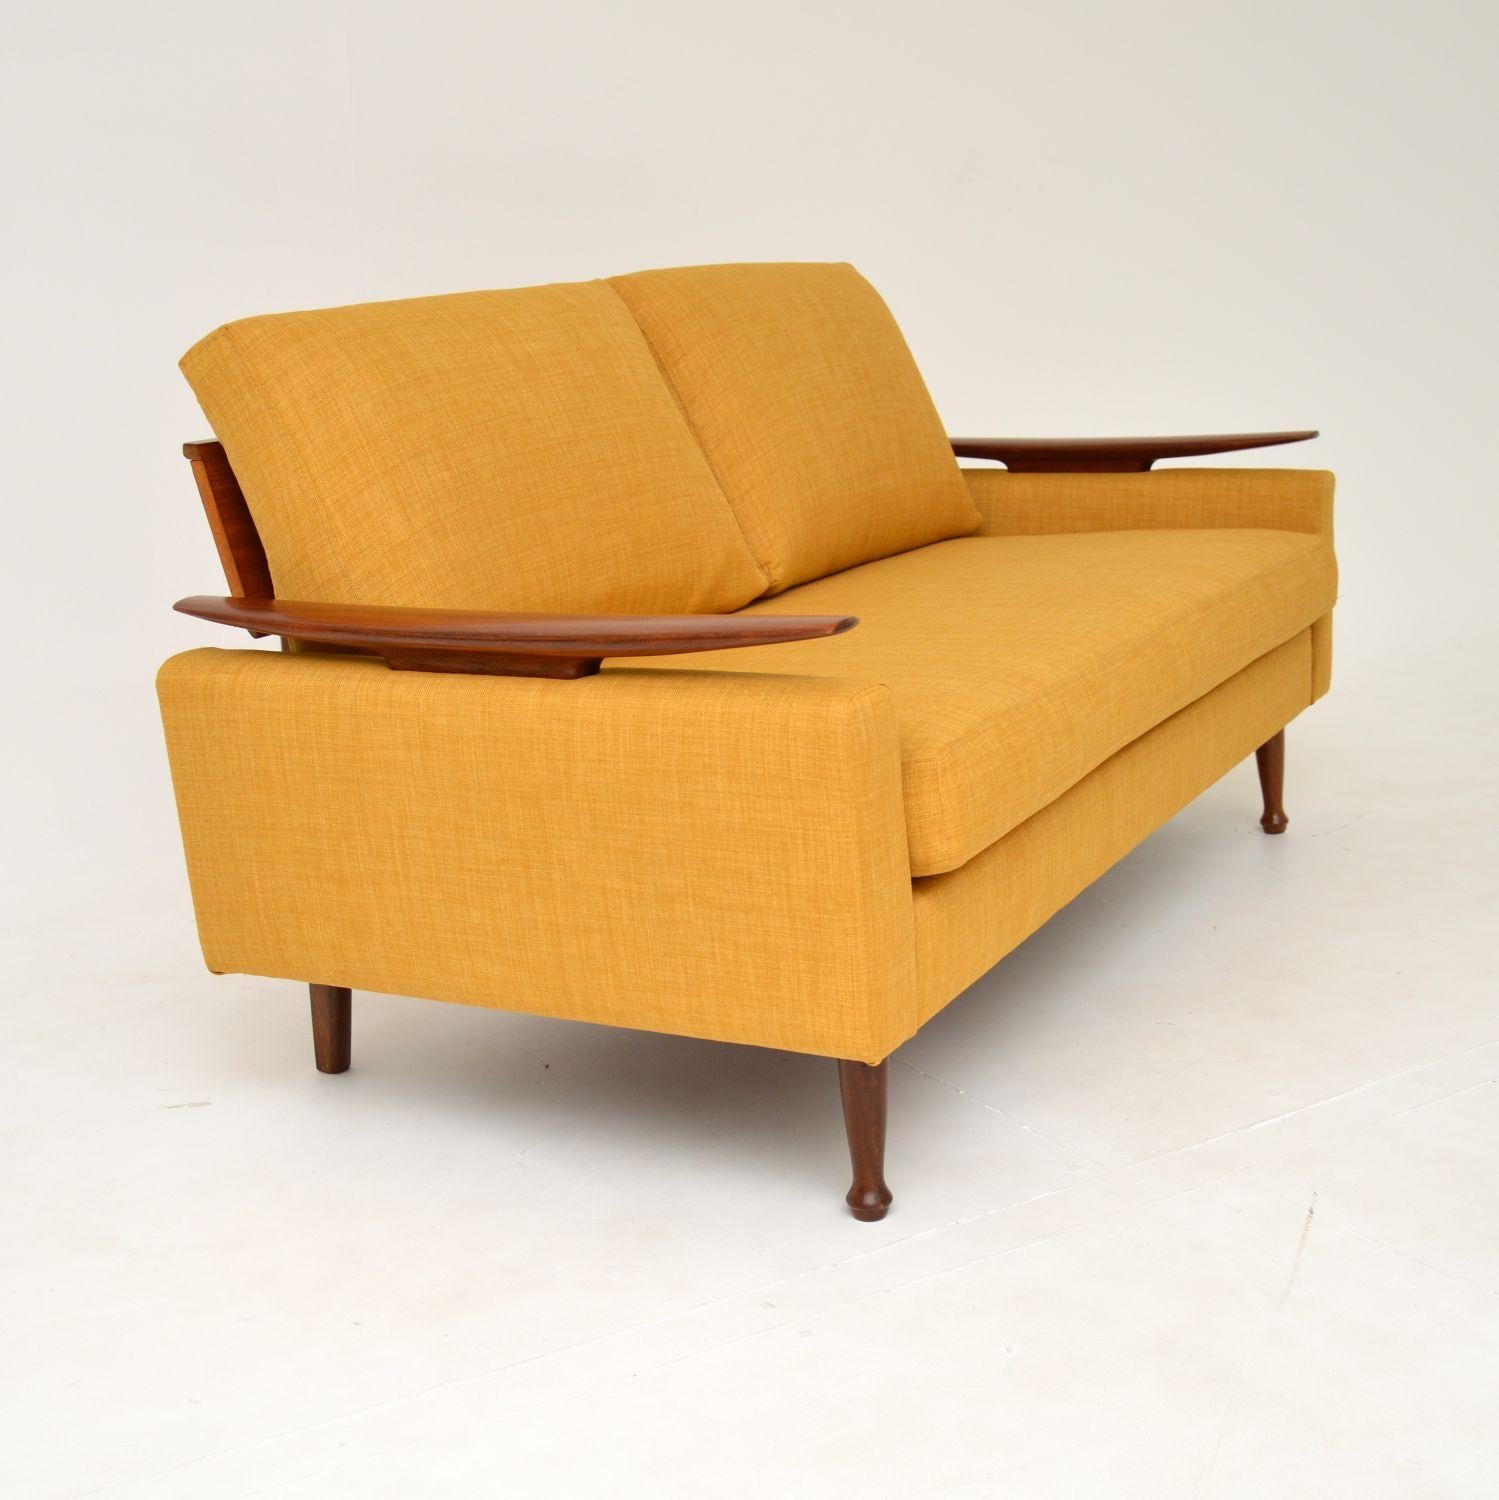 Wood 1960's Vintage Sofa Bed by Greaves & Thomas